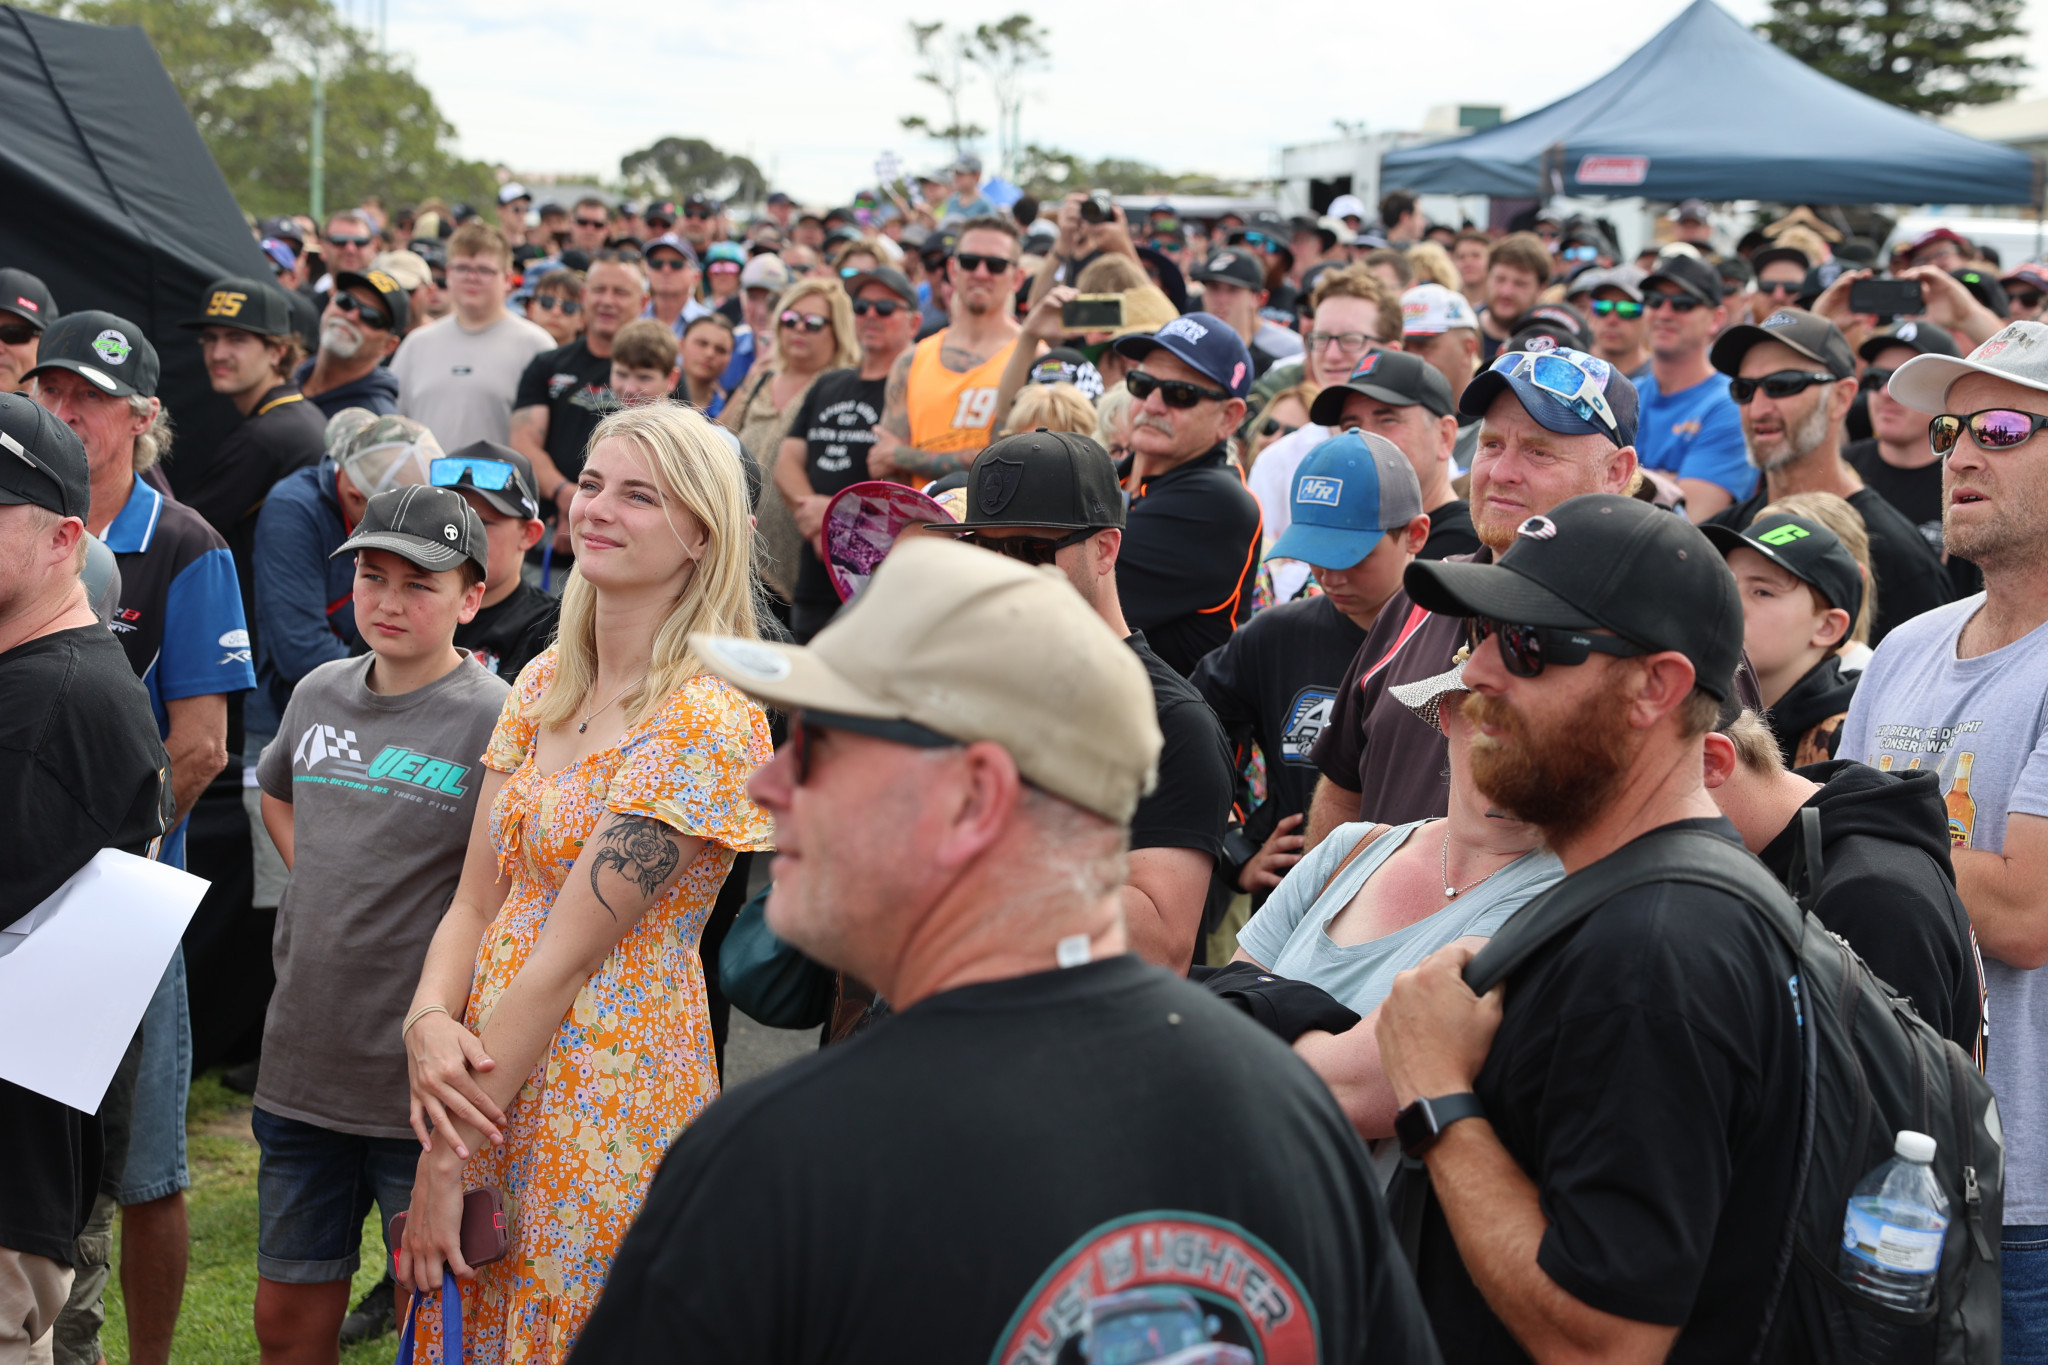 Thousands of race fans flocked to the showgrounds to enjoy last weekend’s fan appreciation day.